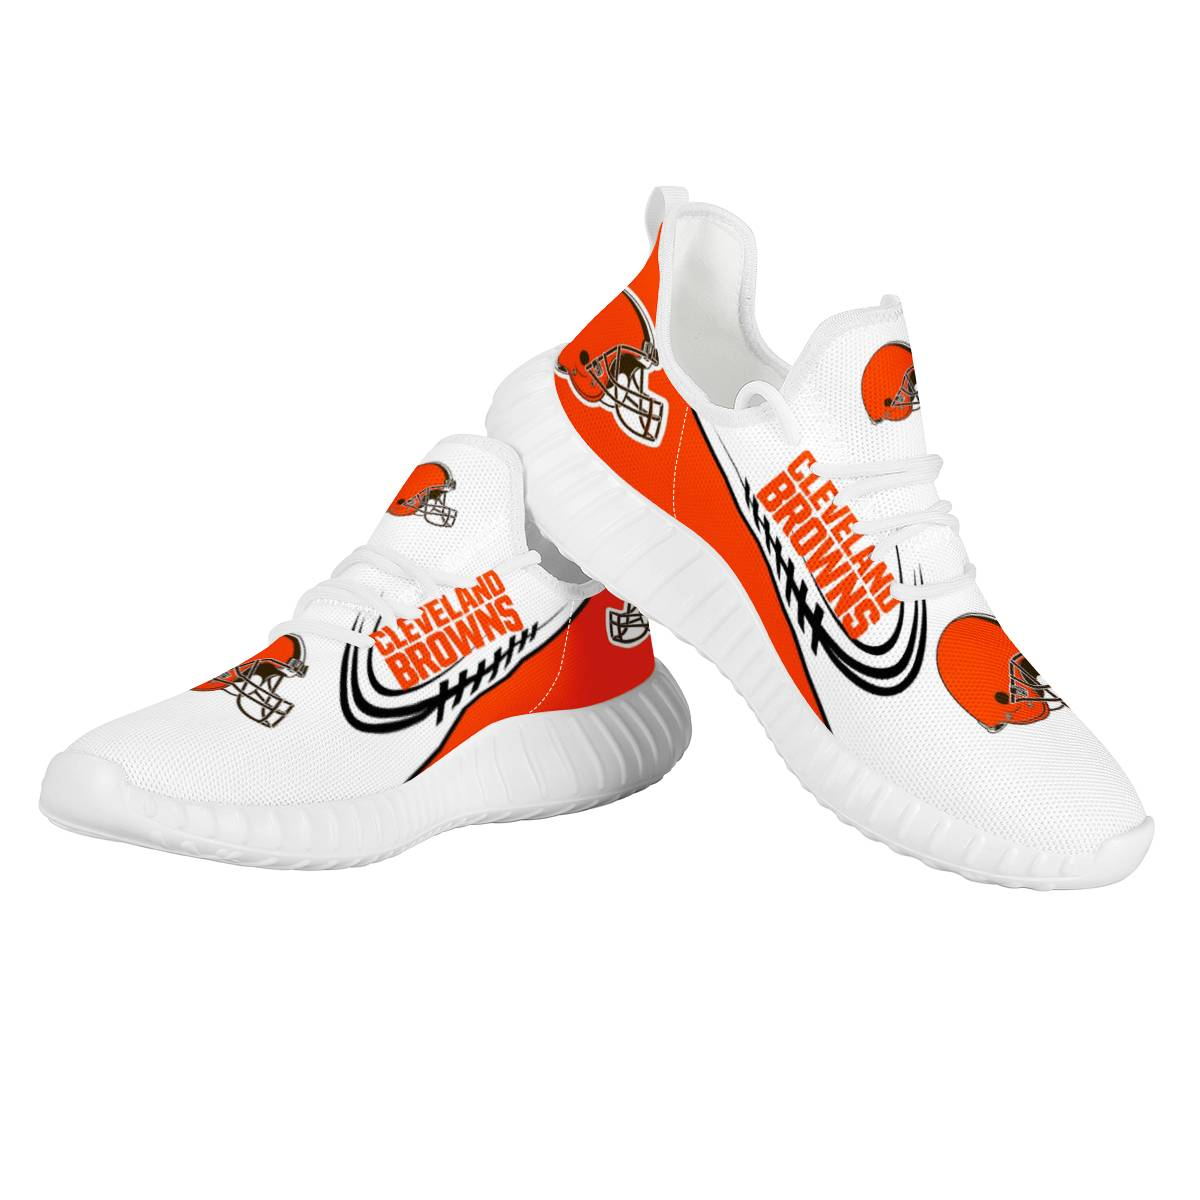 Men's Cleveland Browns Mesh Knit Sneakers/Shoes 008